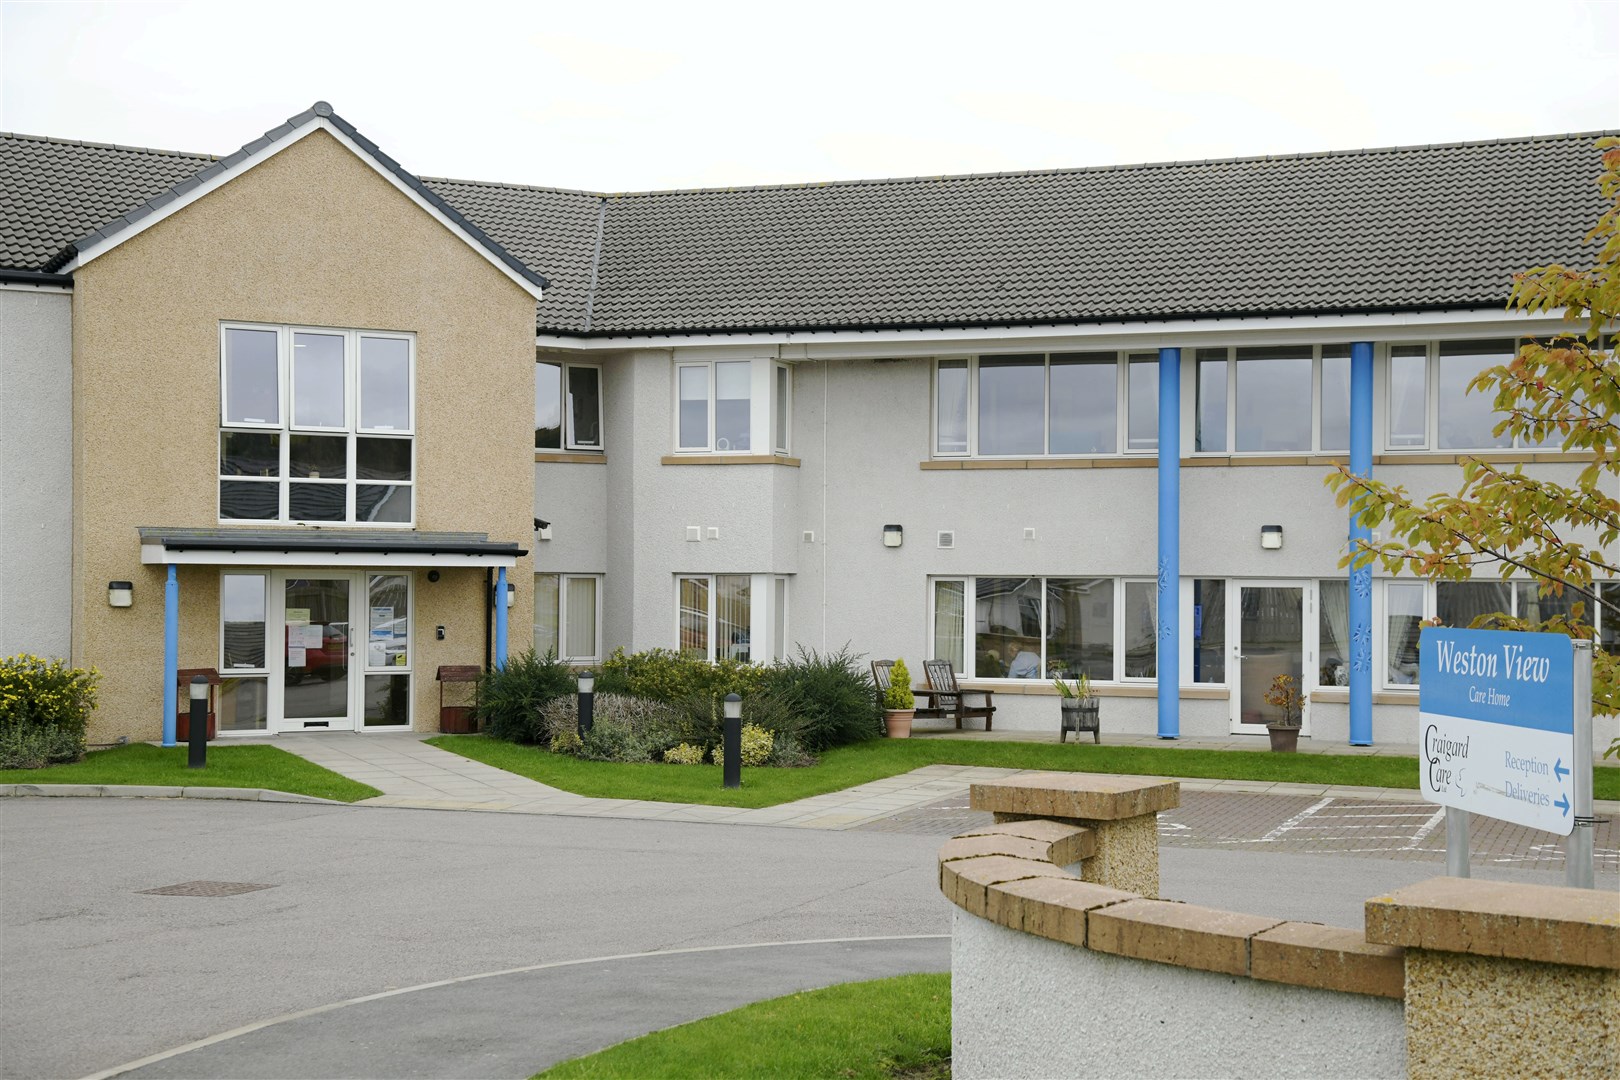 Weston View Care Home in Keith is among the homes set to be sold. Picture: Beth Taylor